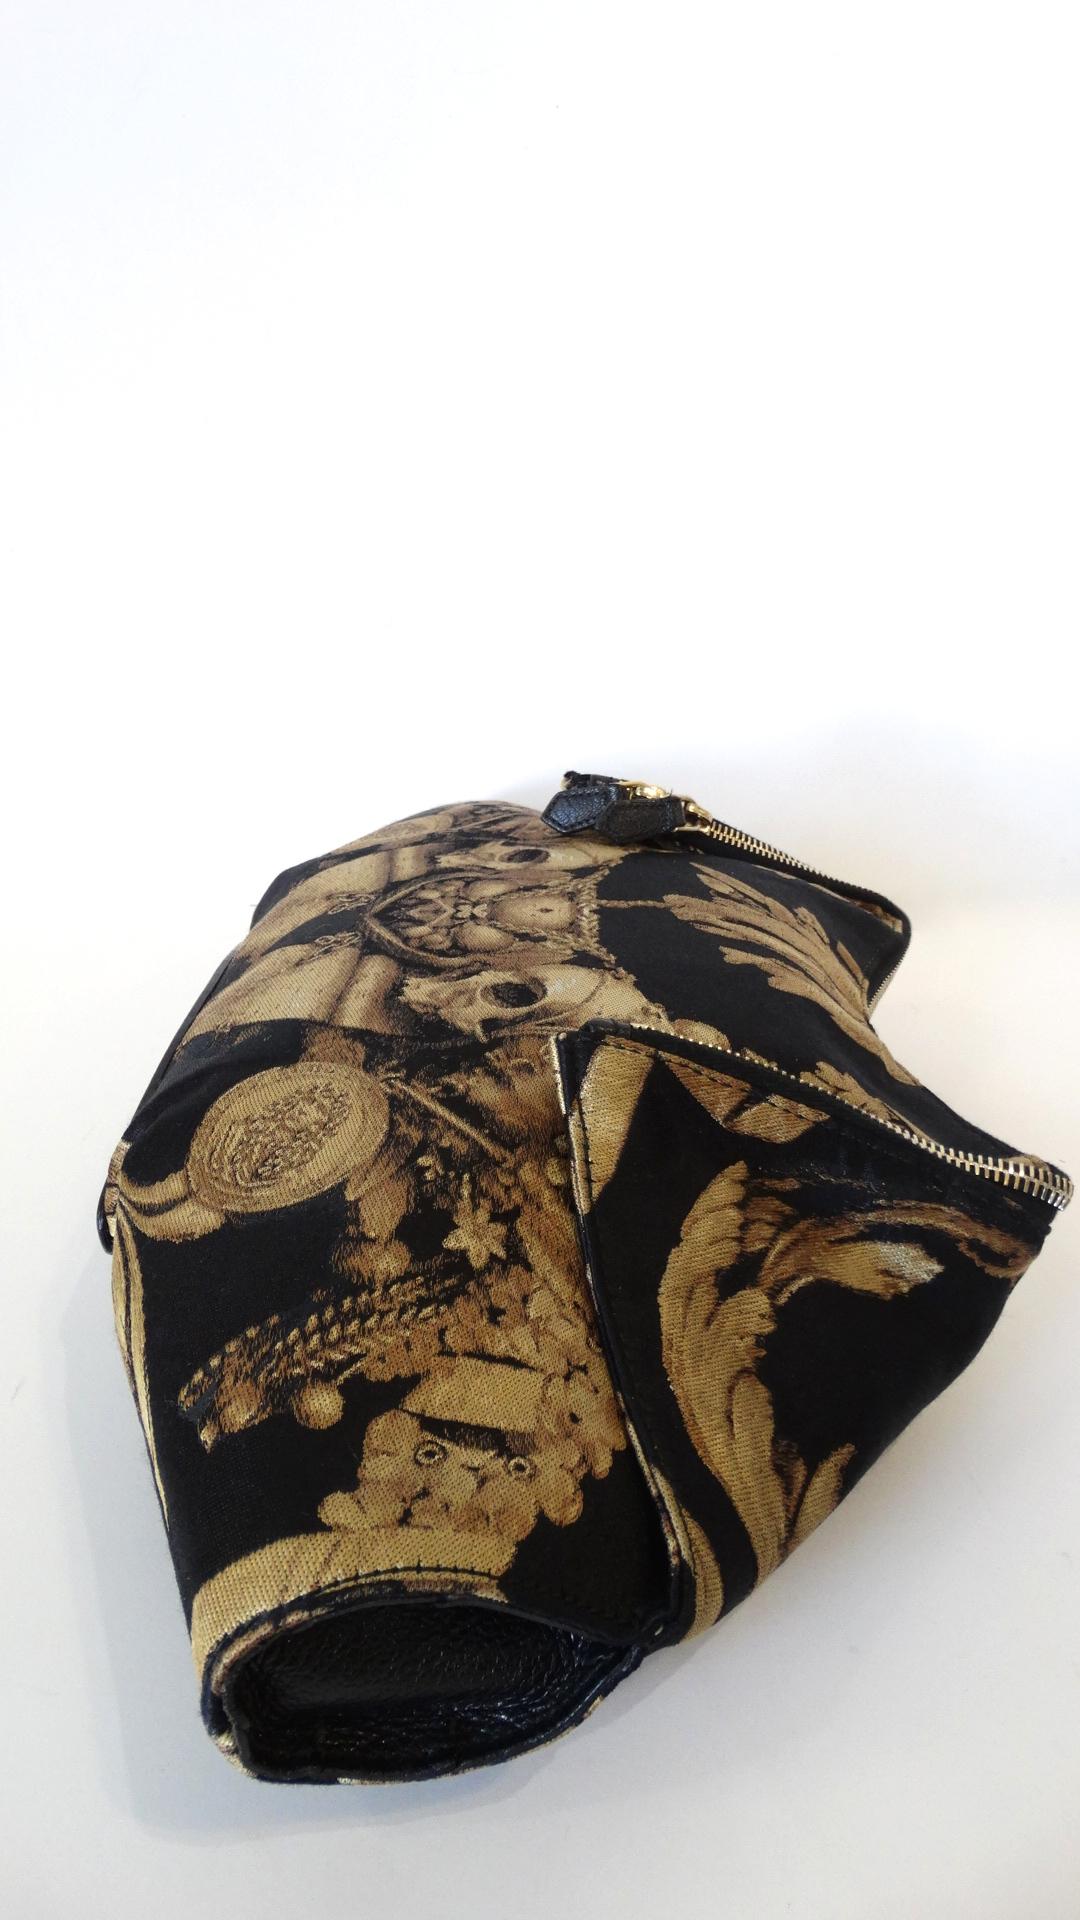 The Most Amazing Clutch Has Arrived And It Won't Disappoint! From Alexander McQueen's final 2010 collection, this clutch is 100% Silk and features a black and gold Gibbons motif with quilted corners. A gold double zipper top closure with magnetic